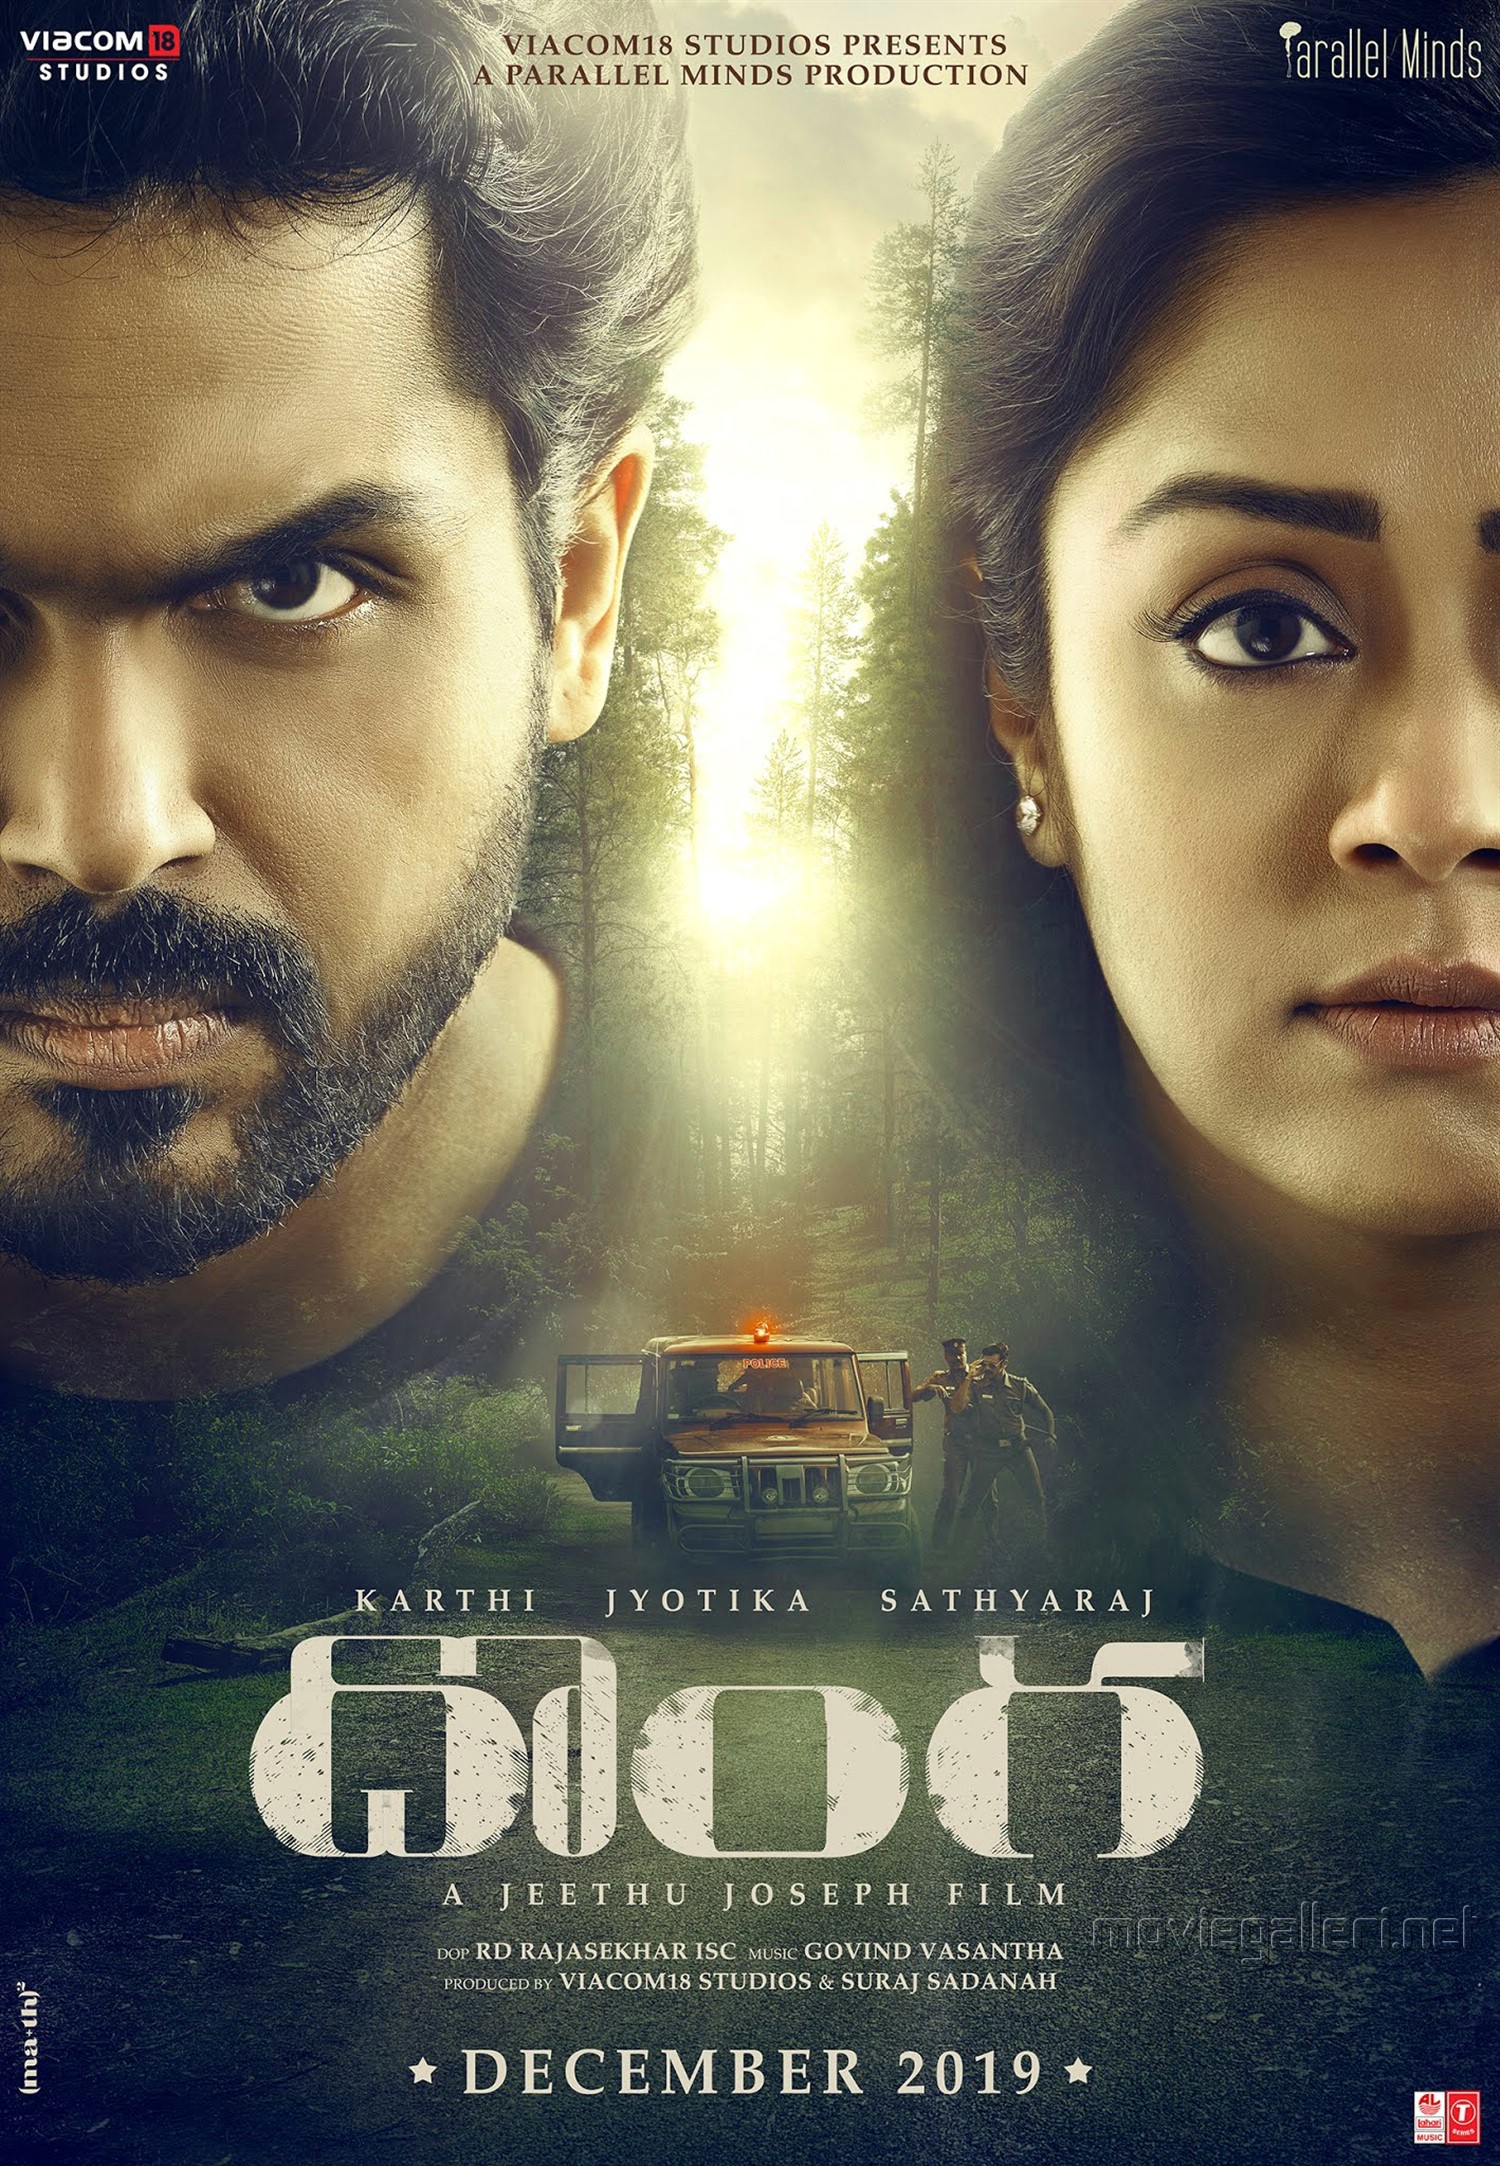 Karthi Jyothika Donga Movie First Look Poster HD New Movie Posters